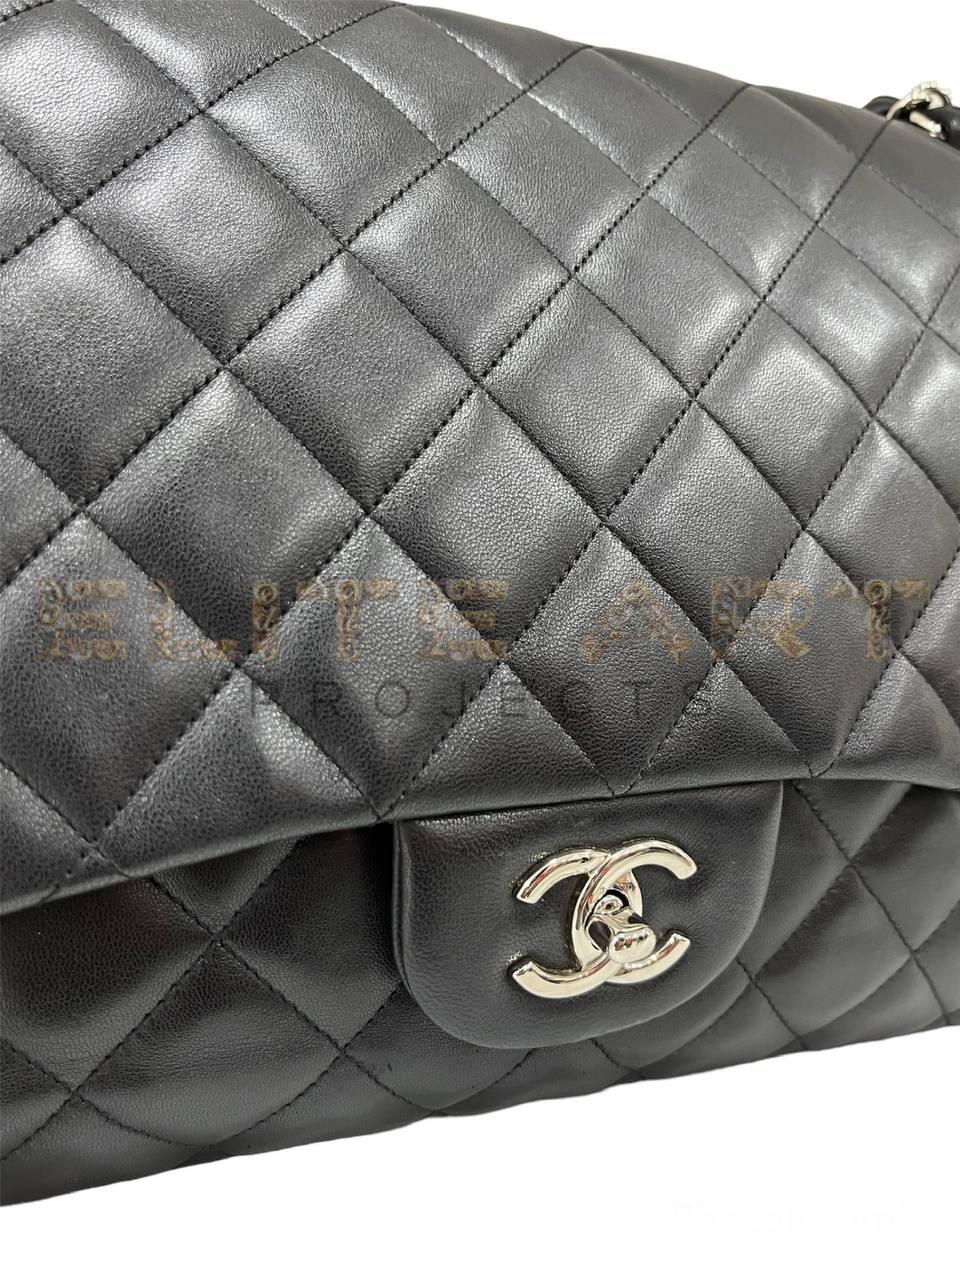 Chanel, Jumbo bag, black leather, silver hardware, good condition